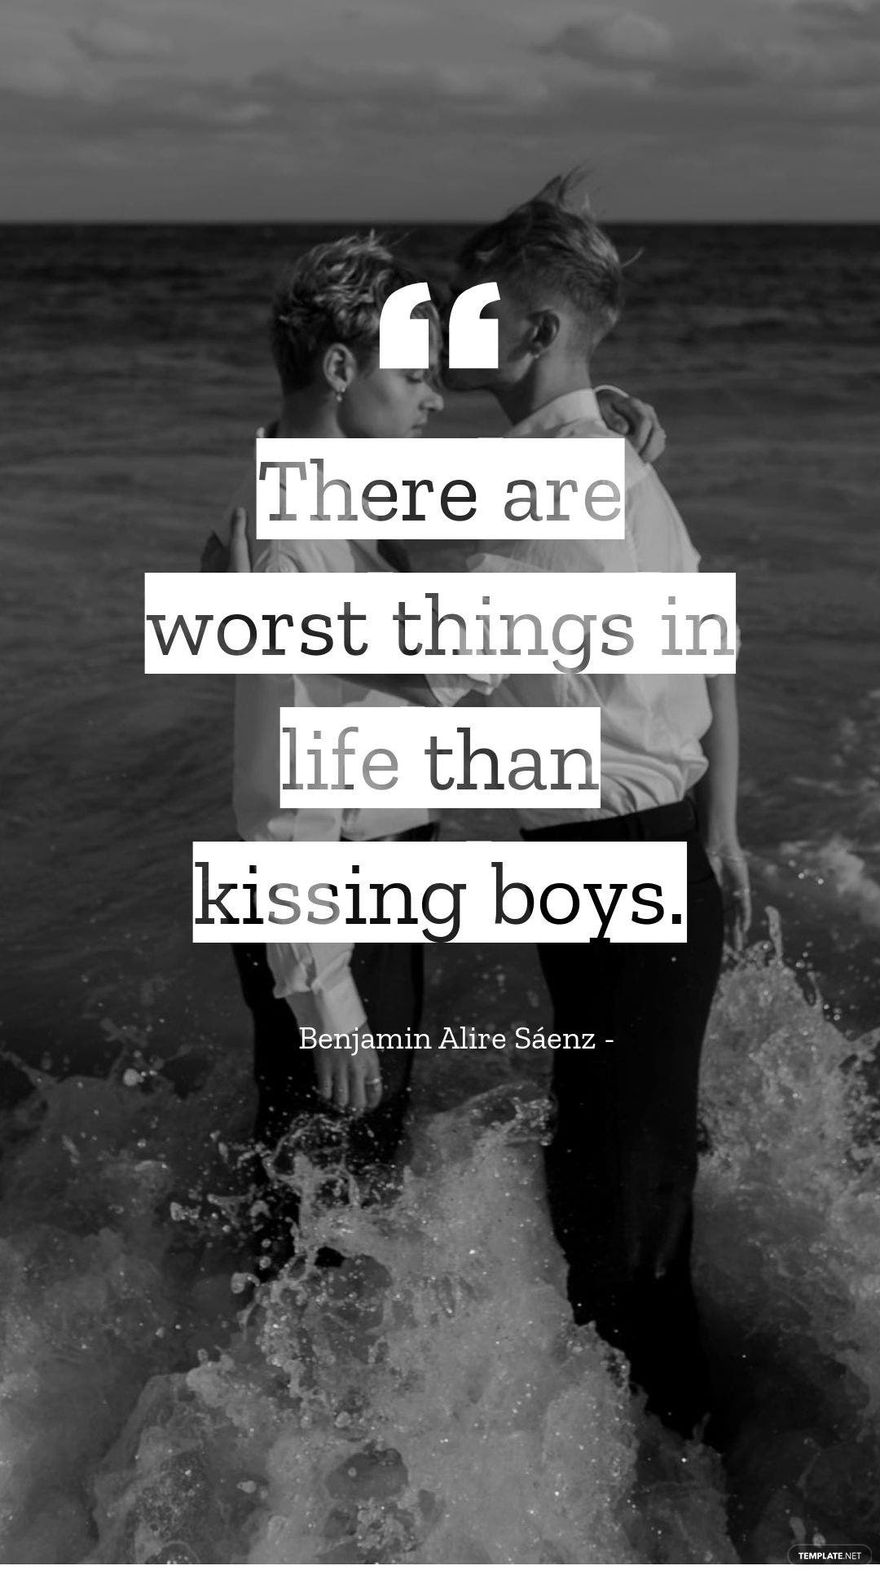 Benjamin Alire Sáenz - There are worst things in life than kissing boys. in JPG